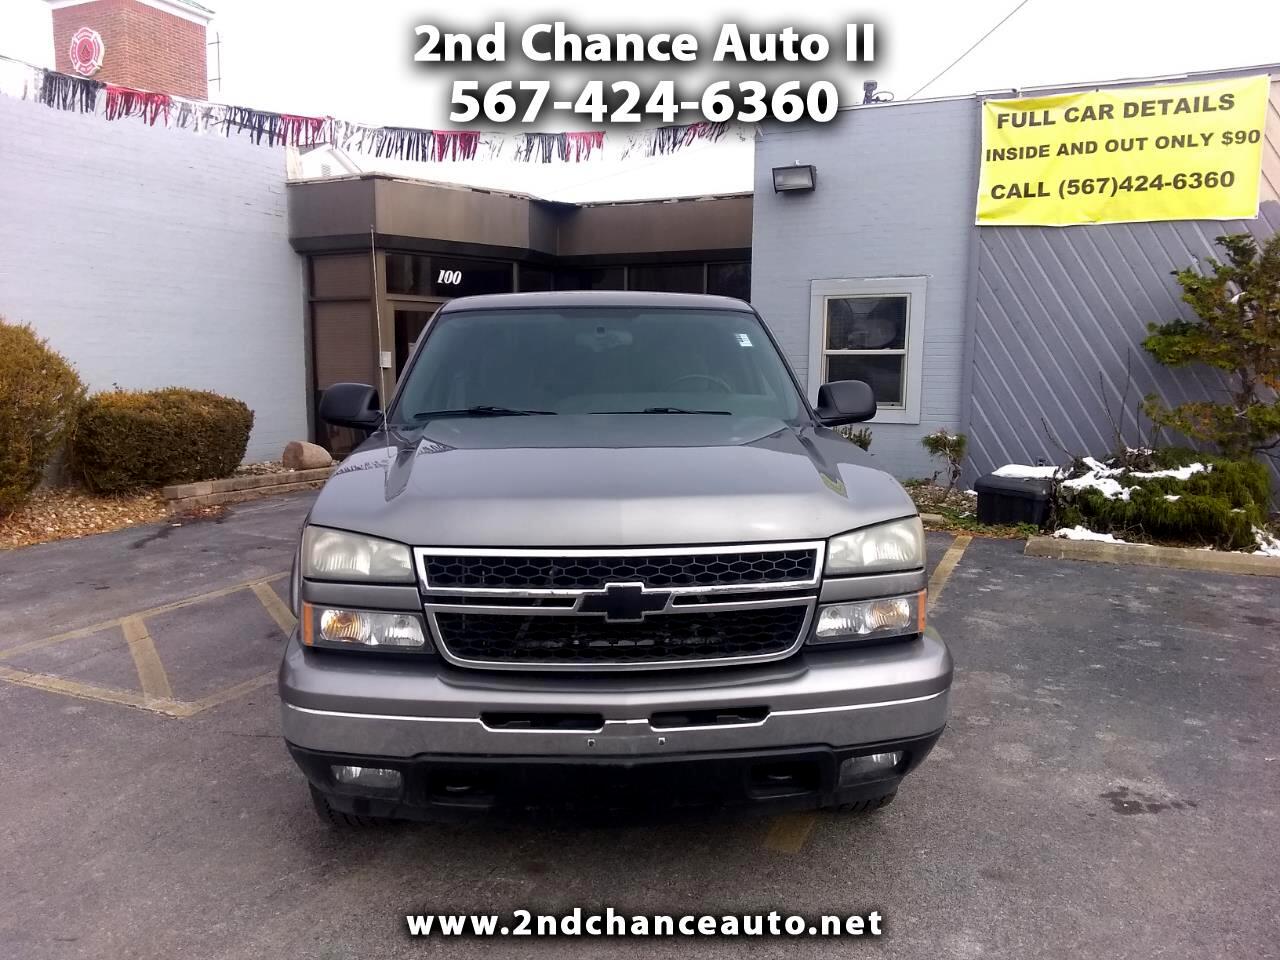 Used 2006 Chevrolet Silverado 1500 Ls Ext Cab 4wd For Sale